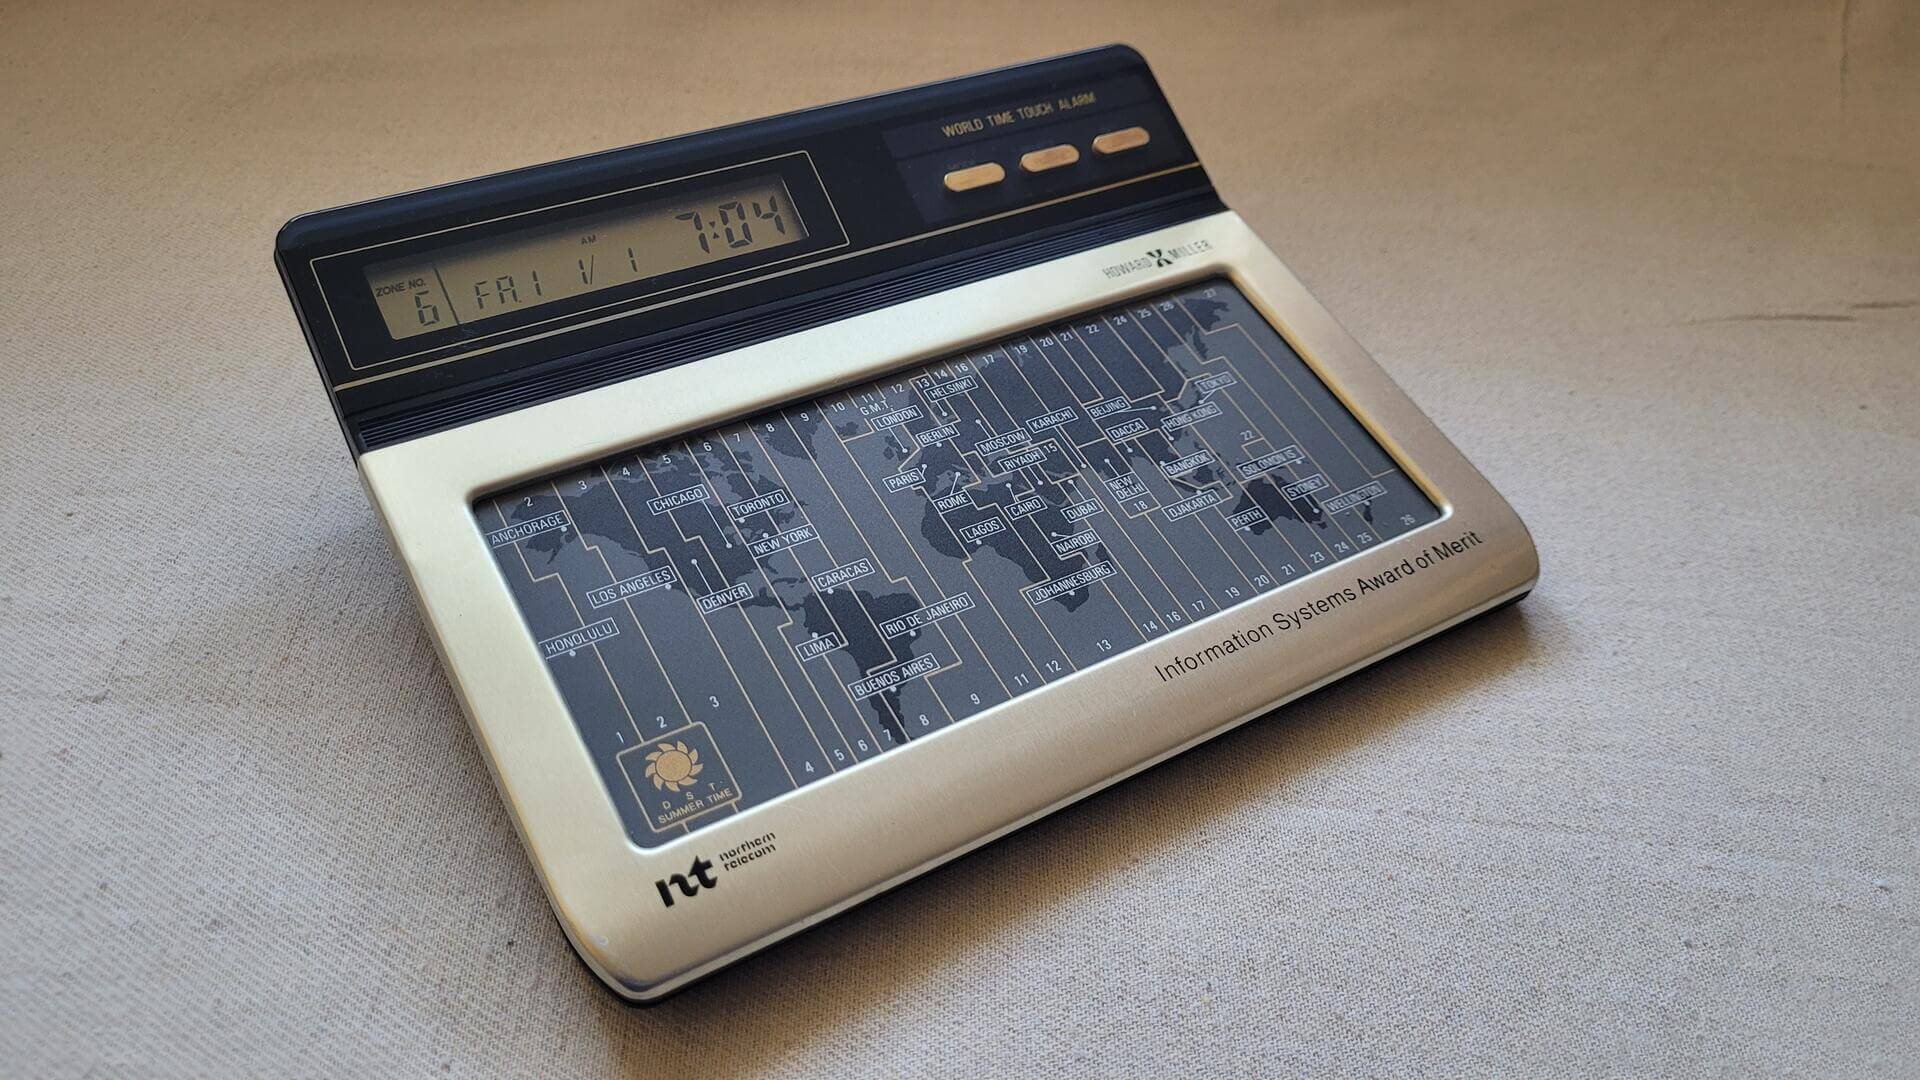 howard-miller-world-time-touchpad-quartz-alarm-clock-retro-vintage-collectible-electronic-gadgets-and-time-pieces-side-view